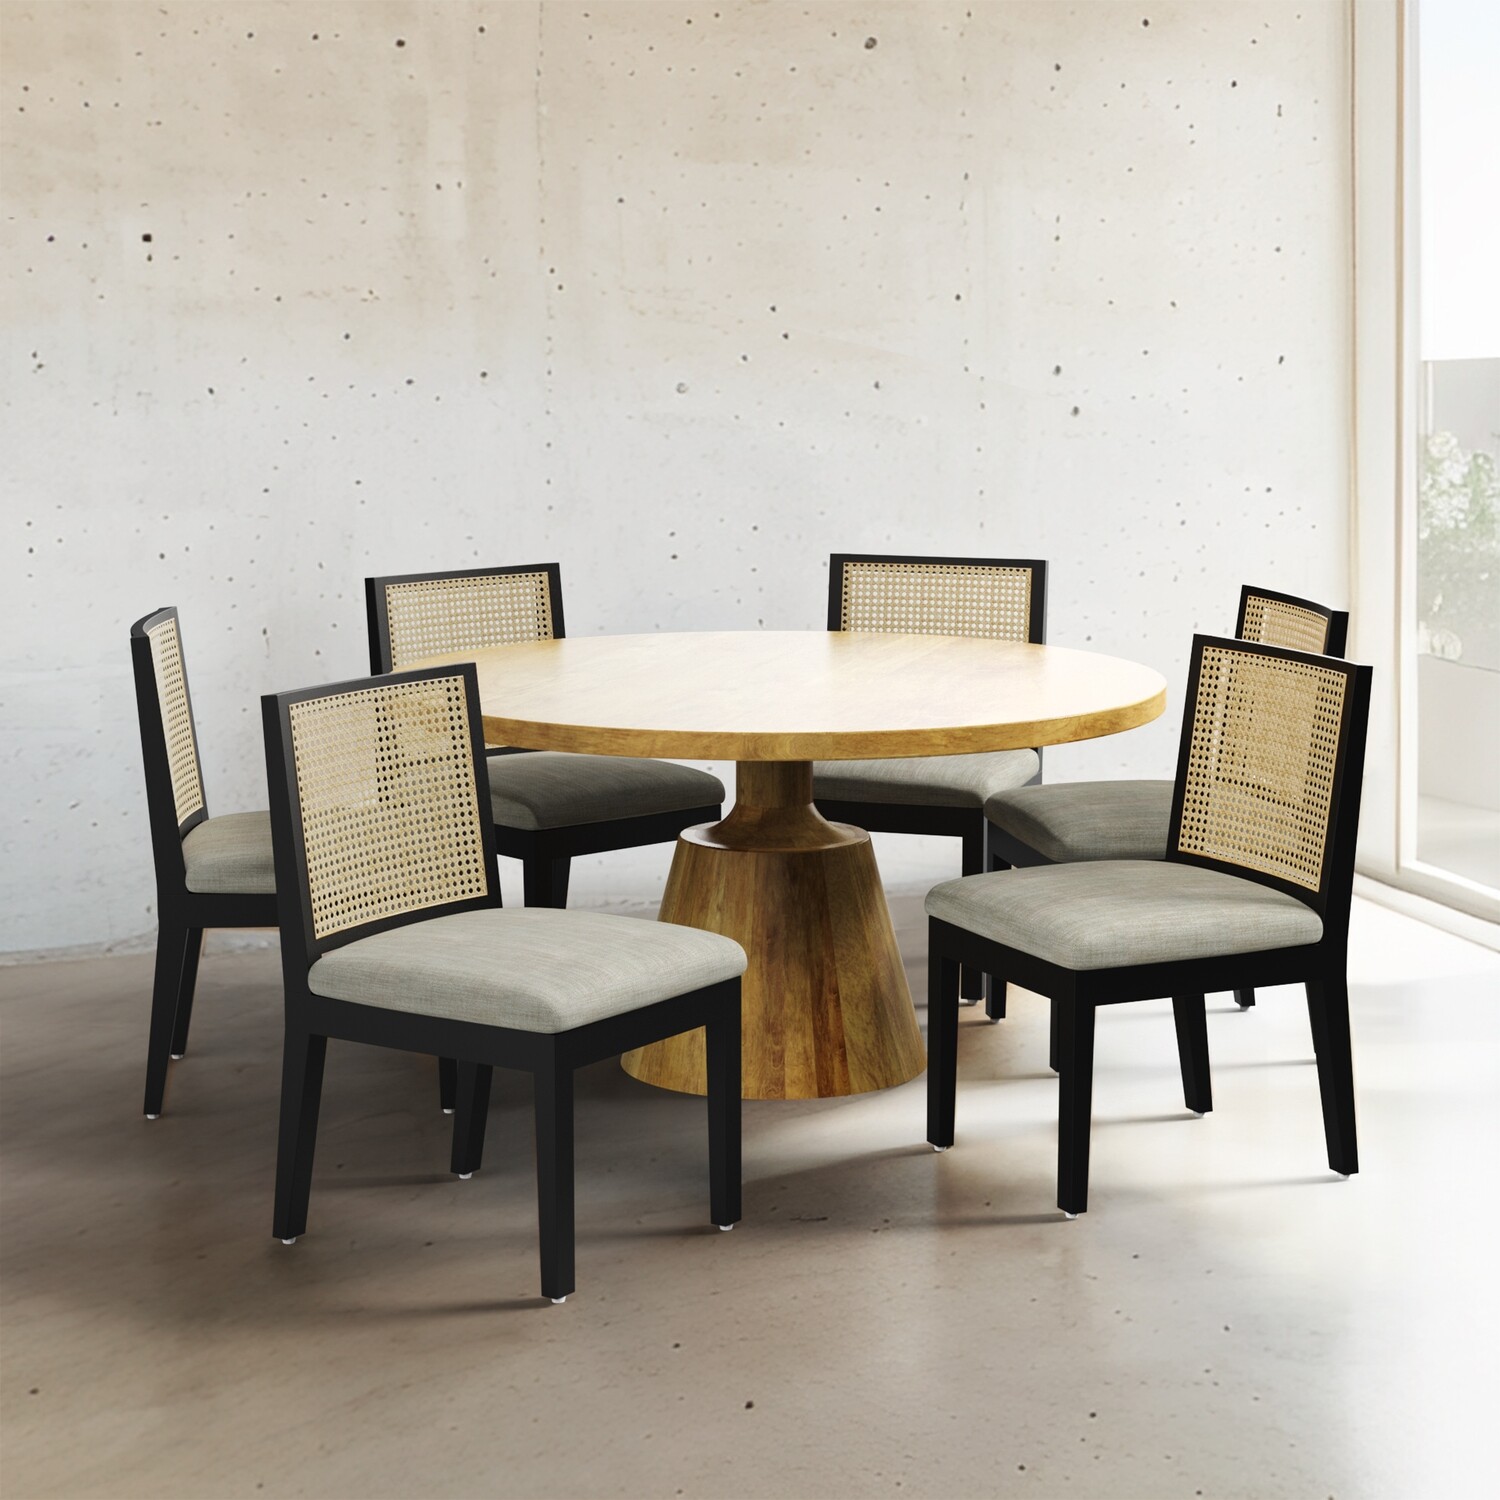 Yukon Dining Table with Emanuella Chairs - 6 Seater/150 cm